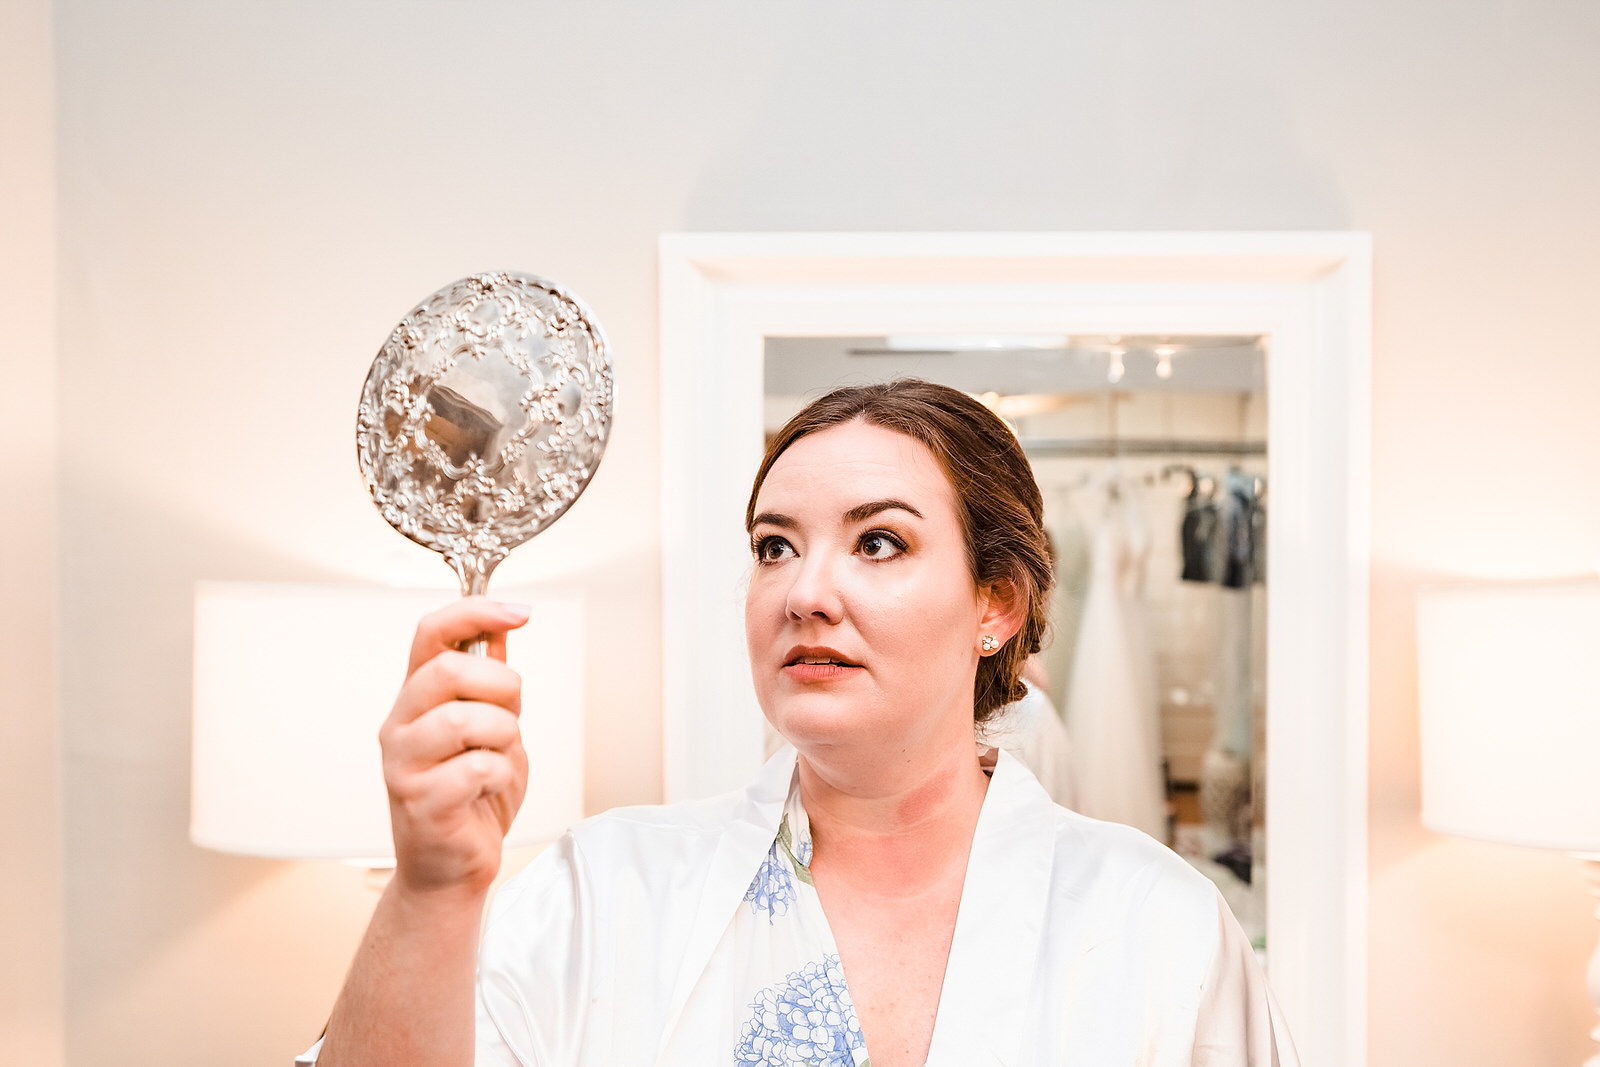 Bride checks out her reflection after finishing her hair and makeup on the morning of her wedding